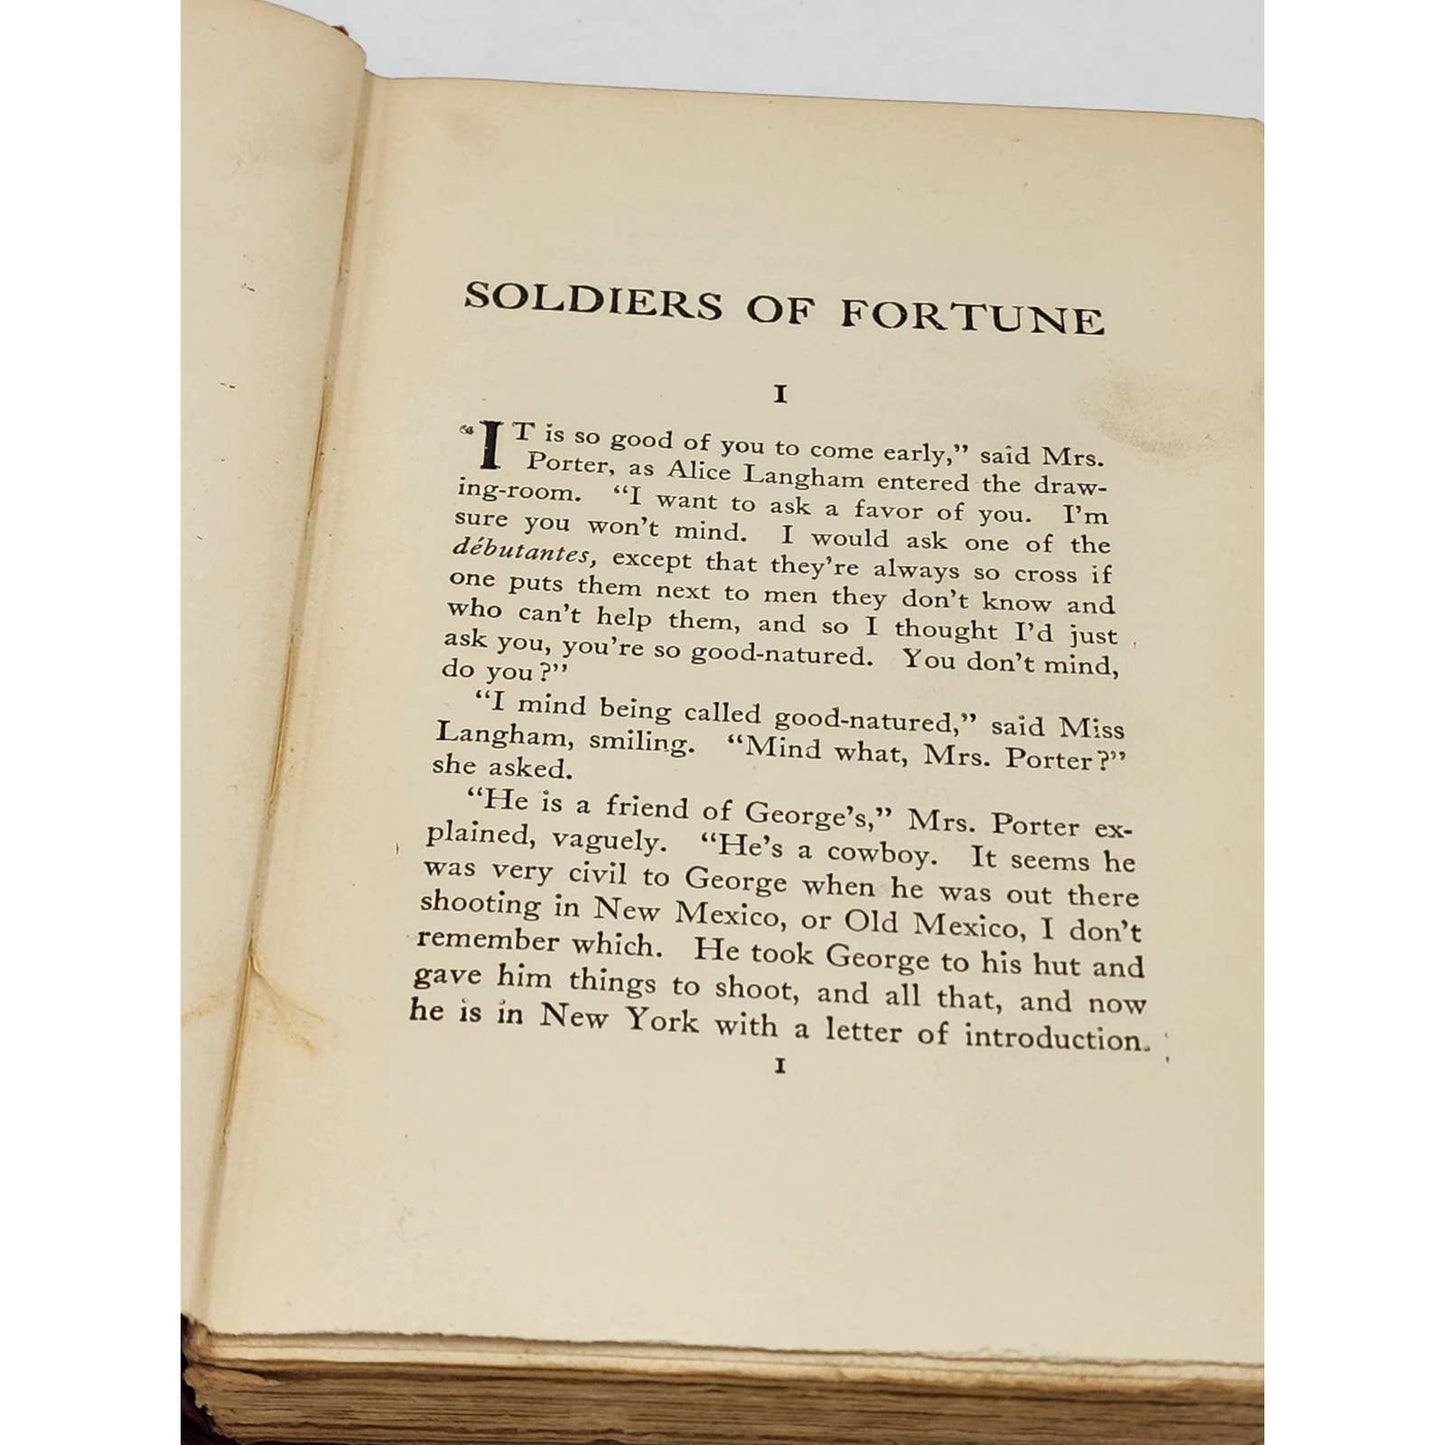 Soldiers Of Fortune By Richard Harding Days Antiquarian Antique 1910